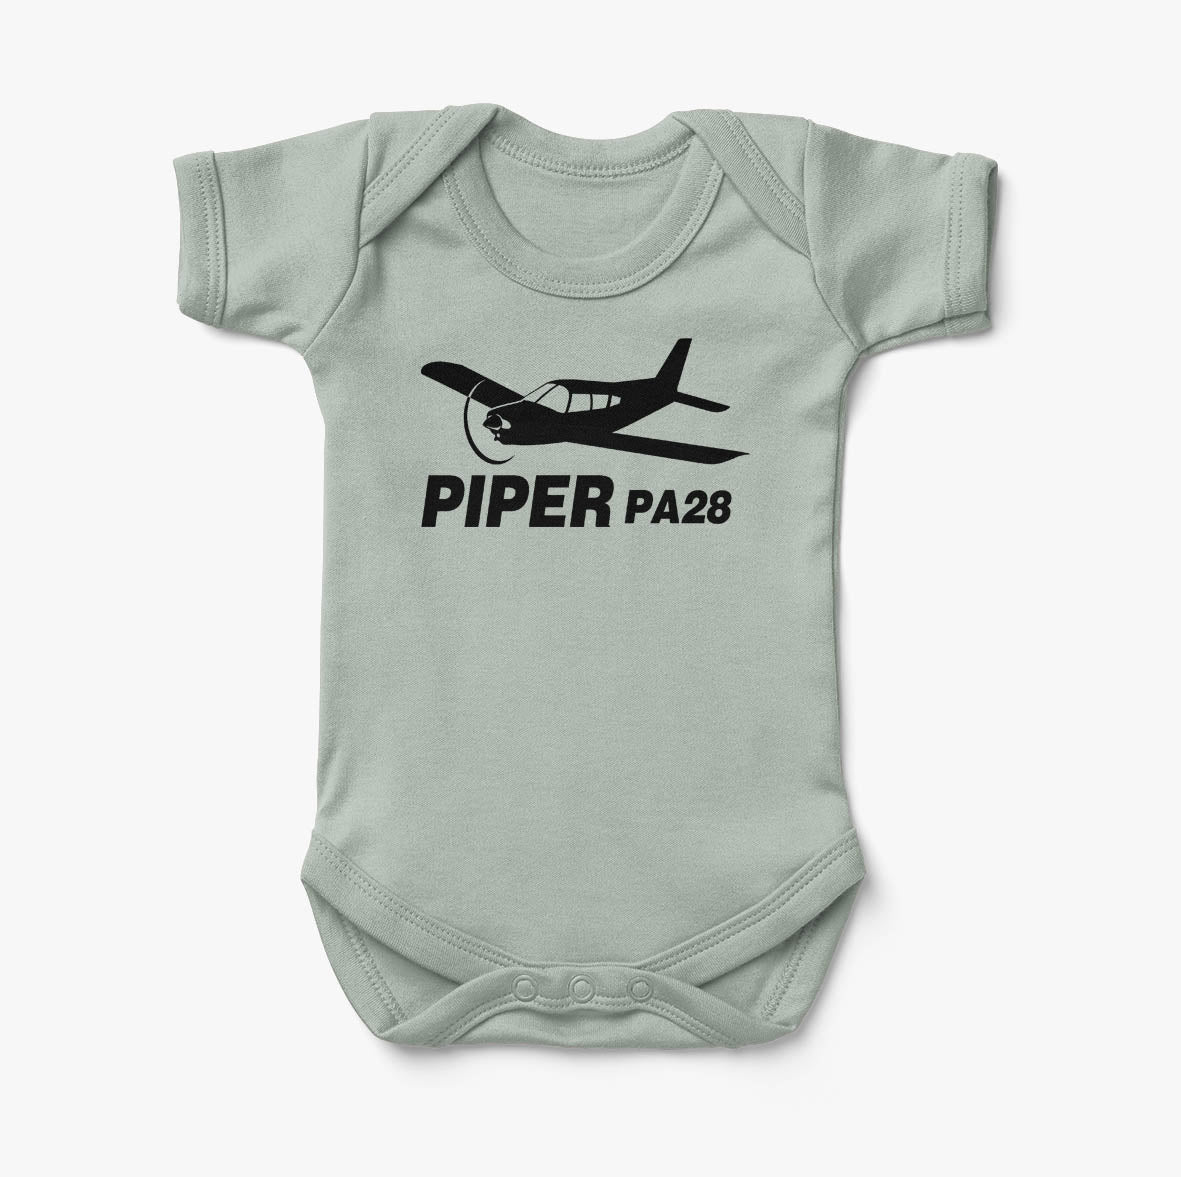 The Piper PA28 Designed Baby Bodysuits